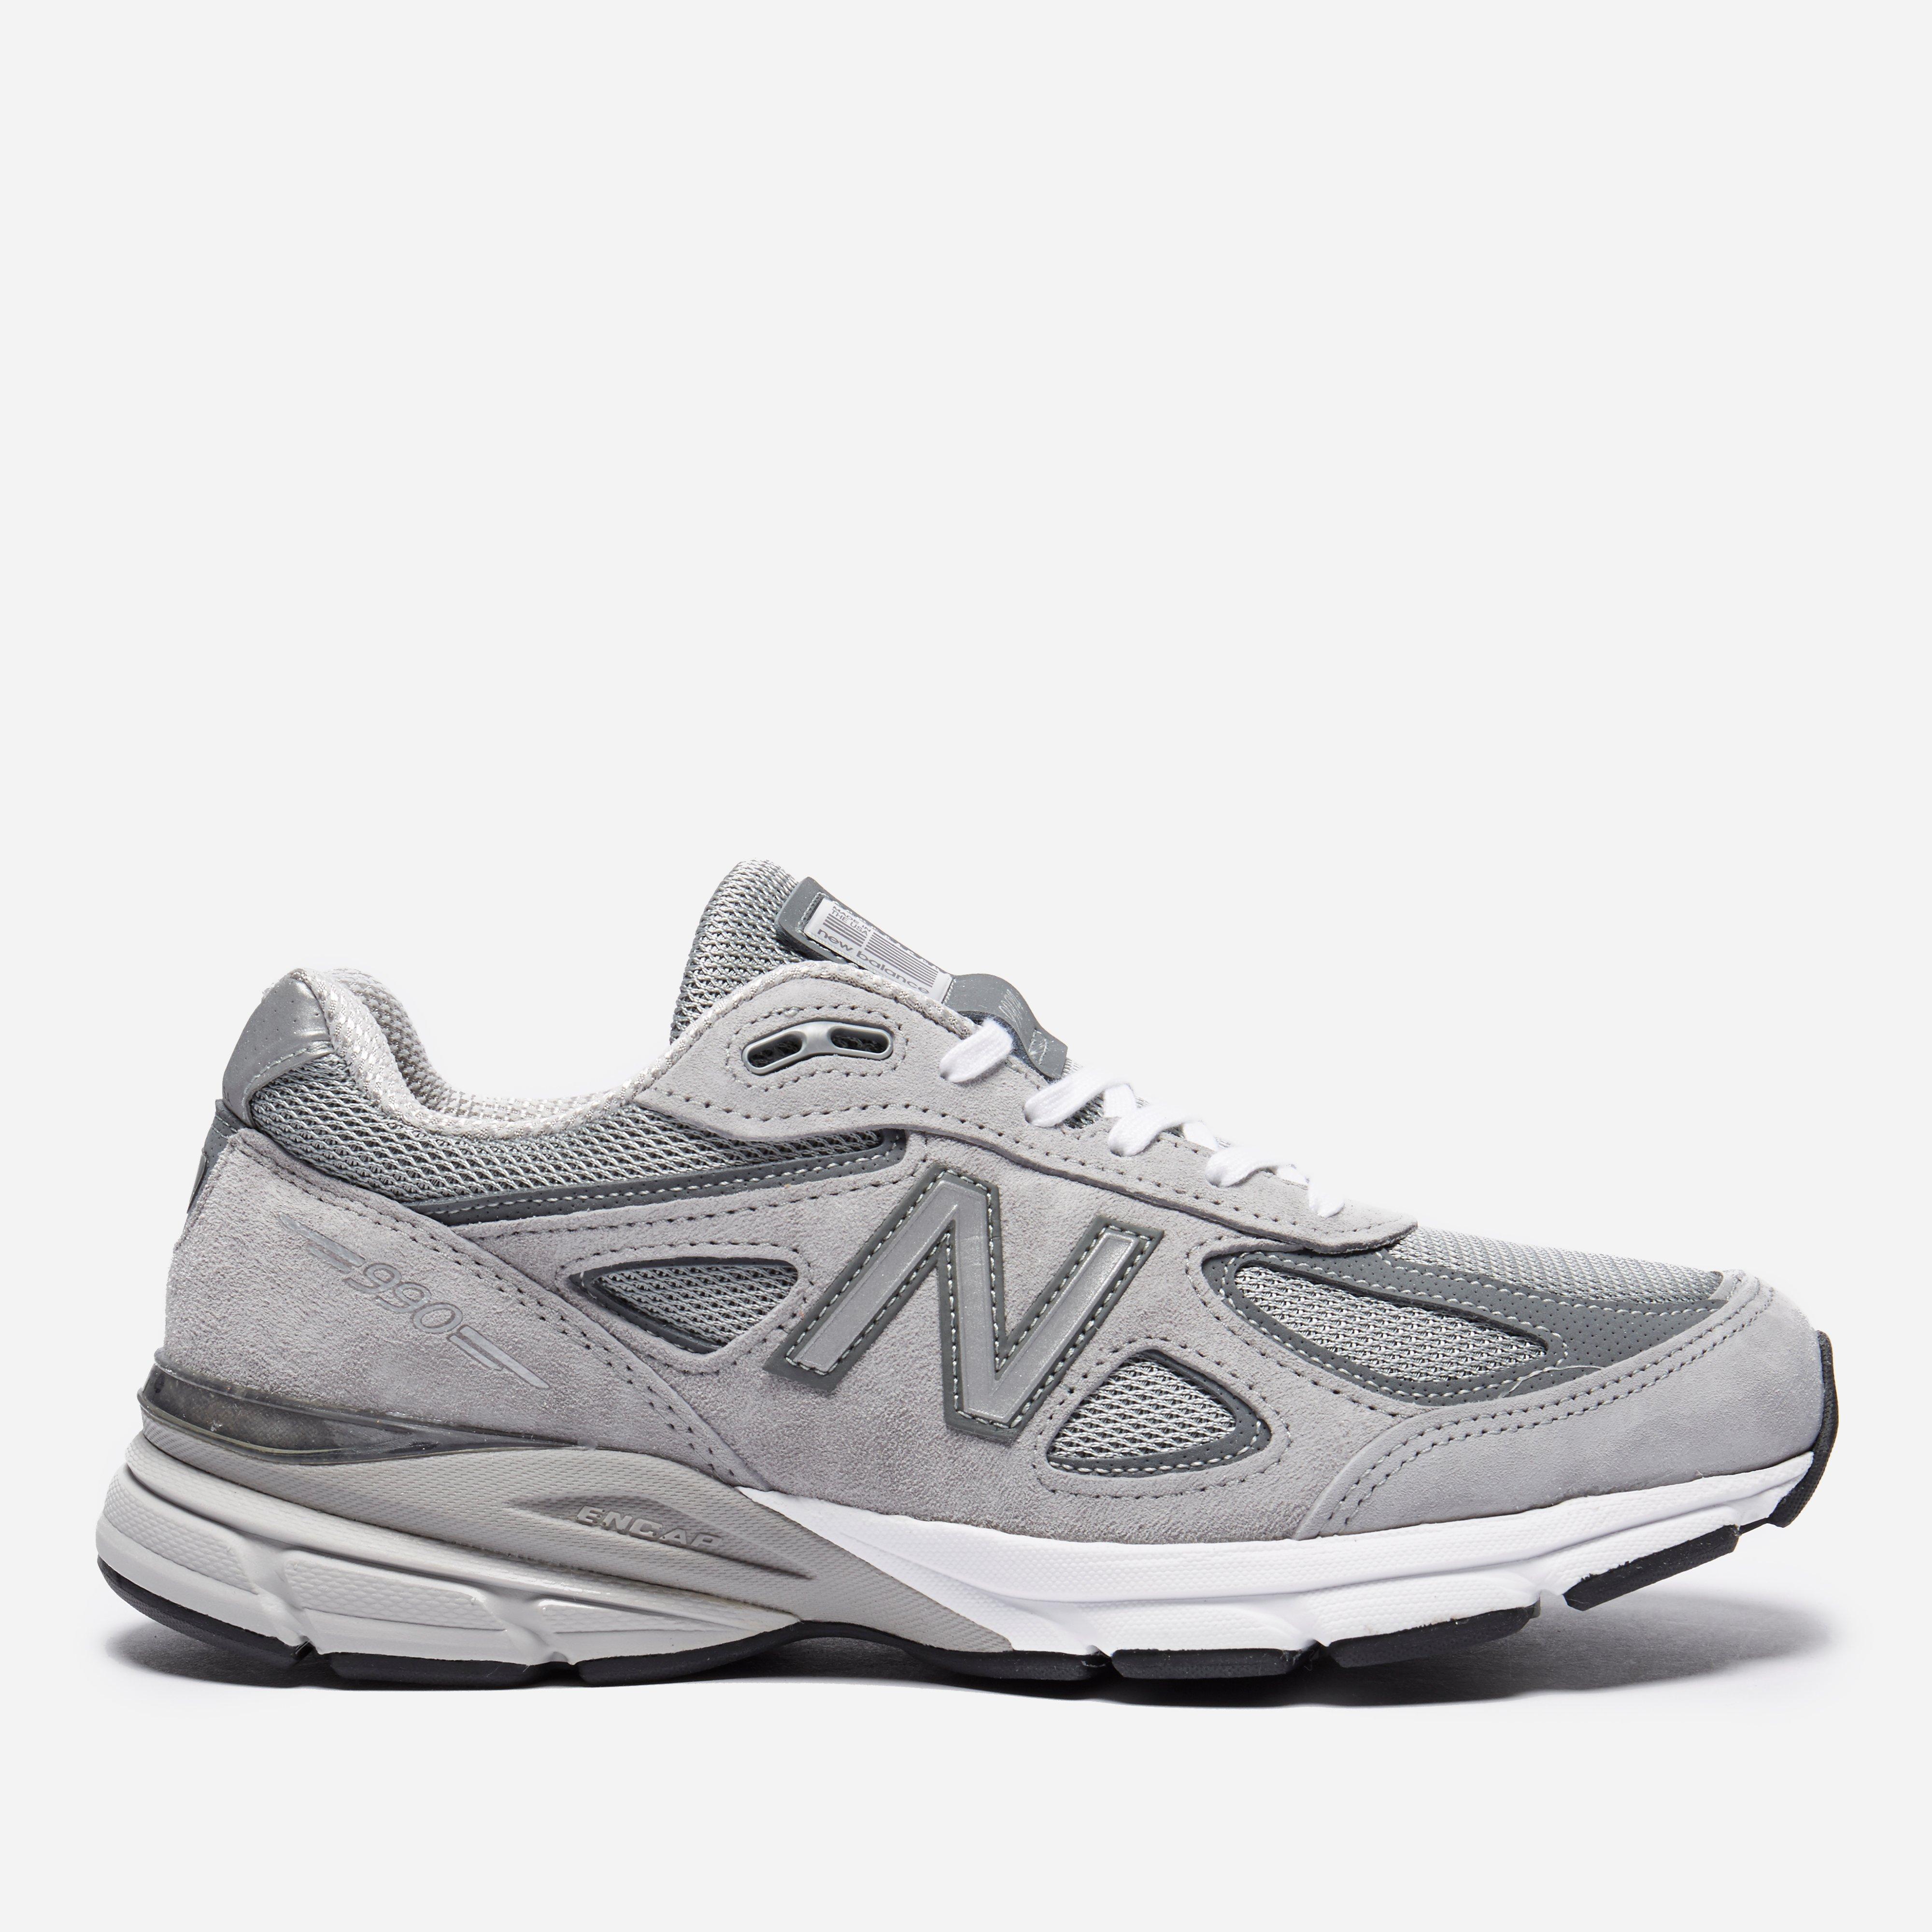 New Balance M 990 Gl4 Made In Usa in 